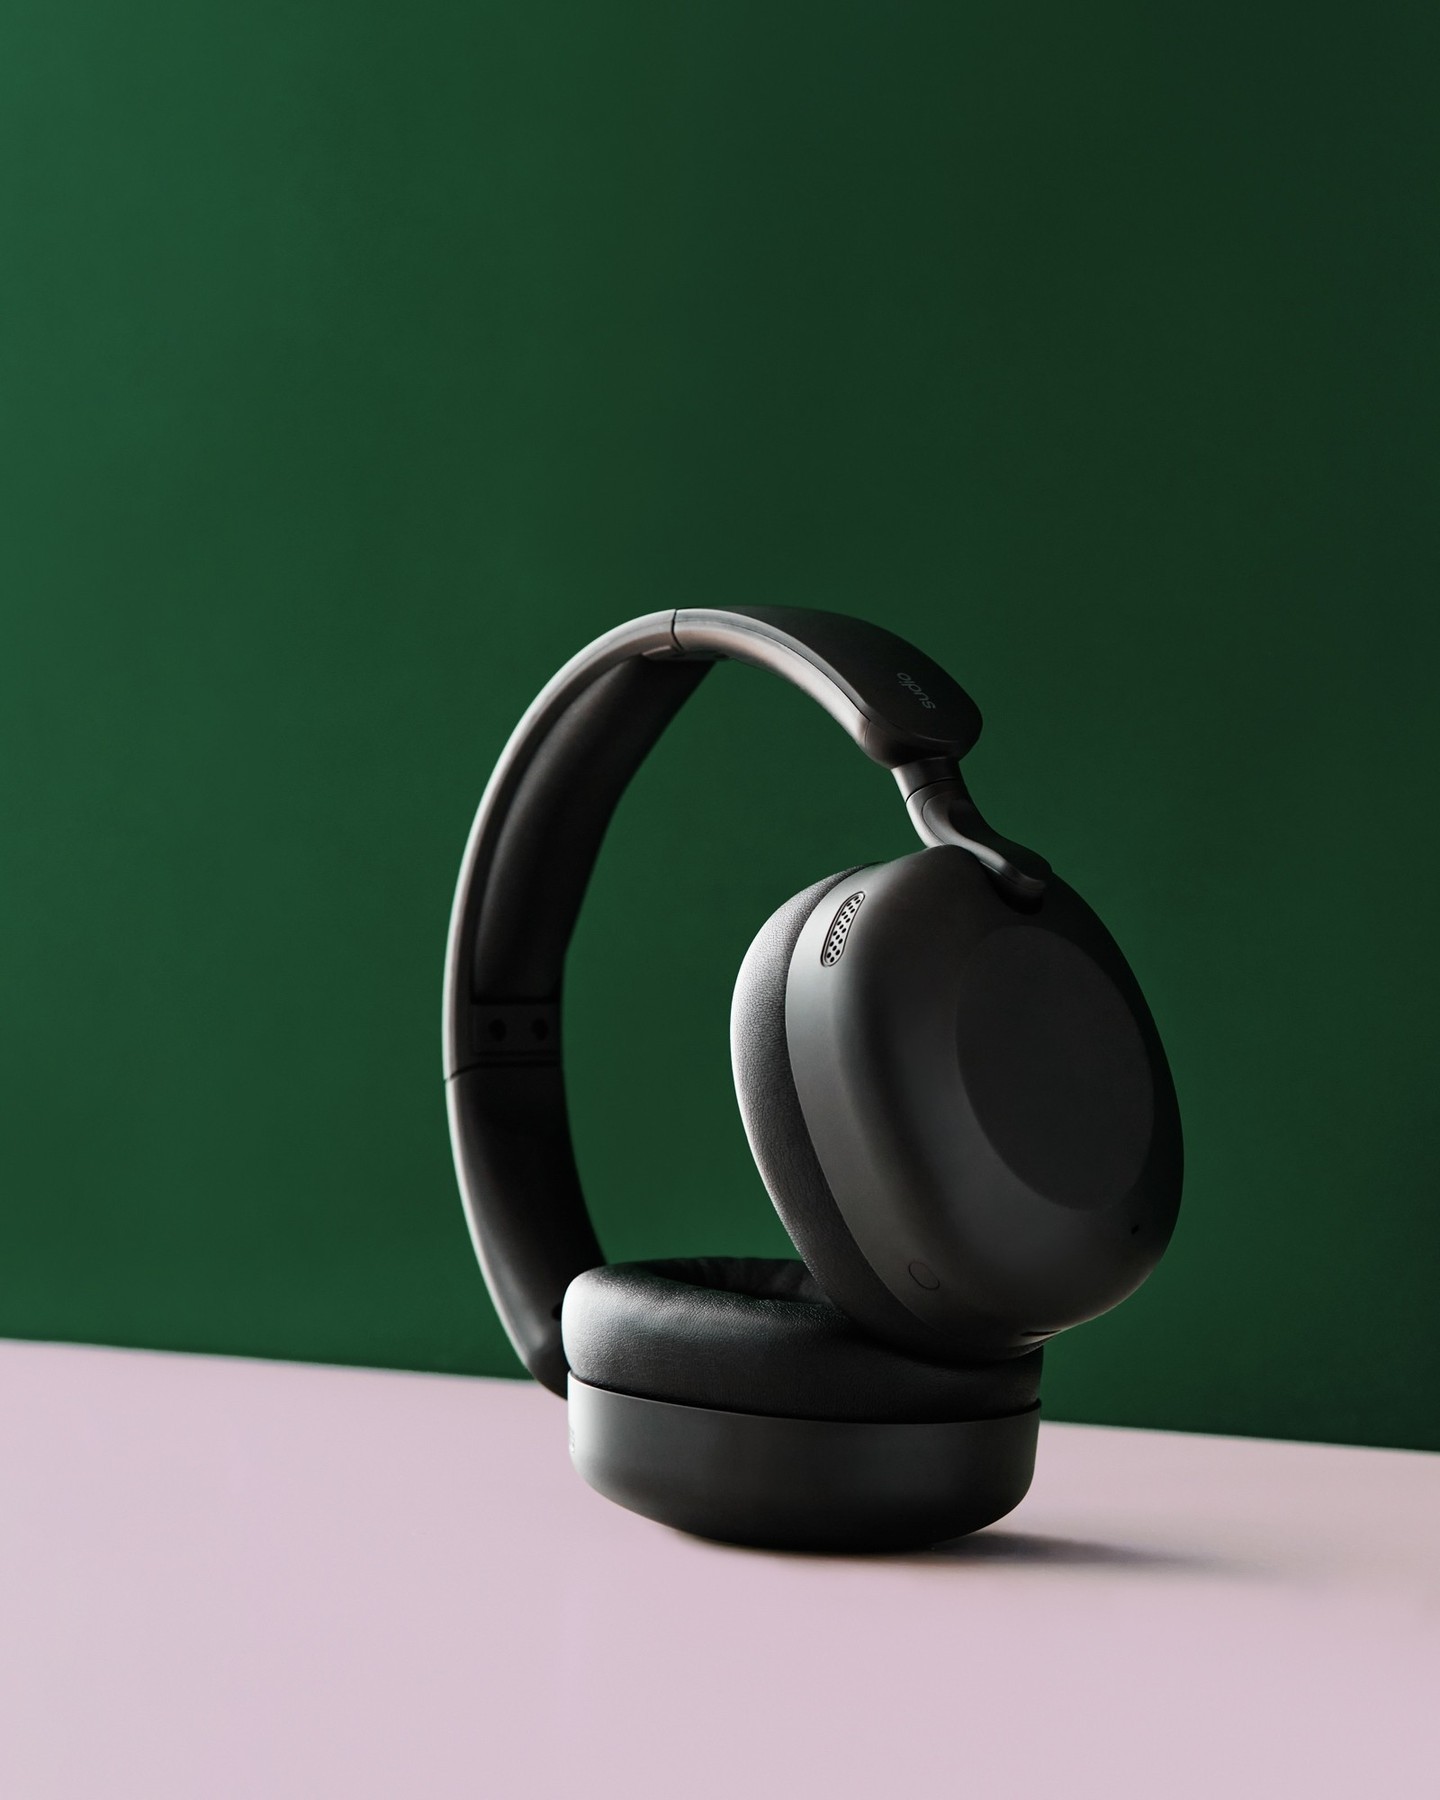 The new Sudio K2 headphones. A work of art for your eyes and ears.⁠⁠#sudio #shapingsound #artislife #K2Black